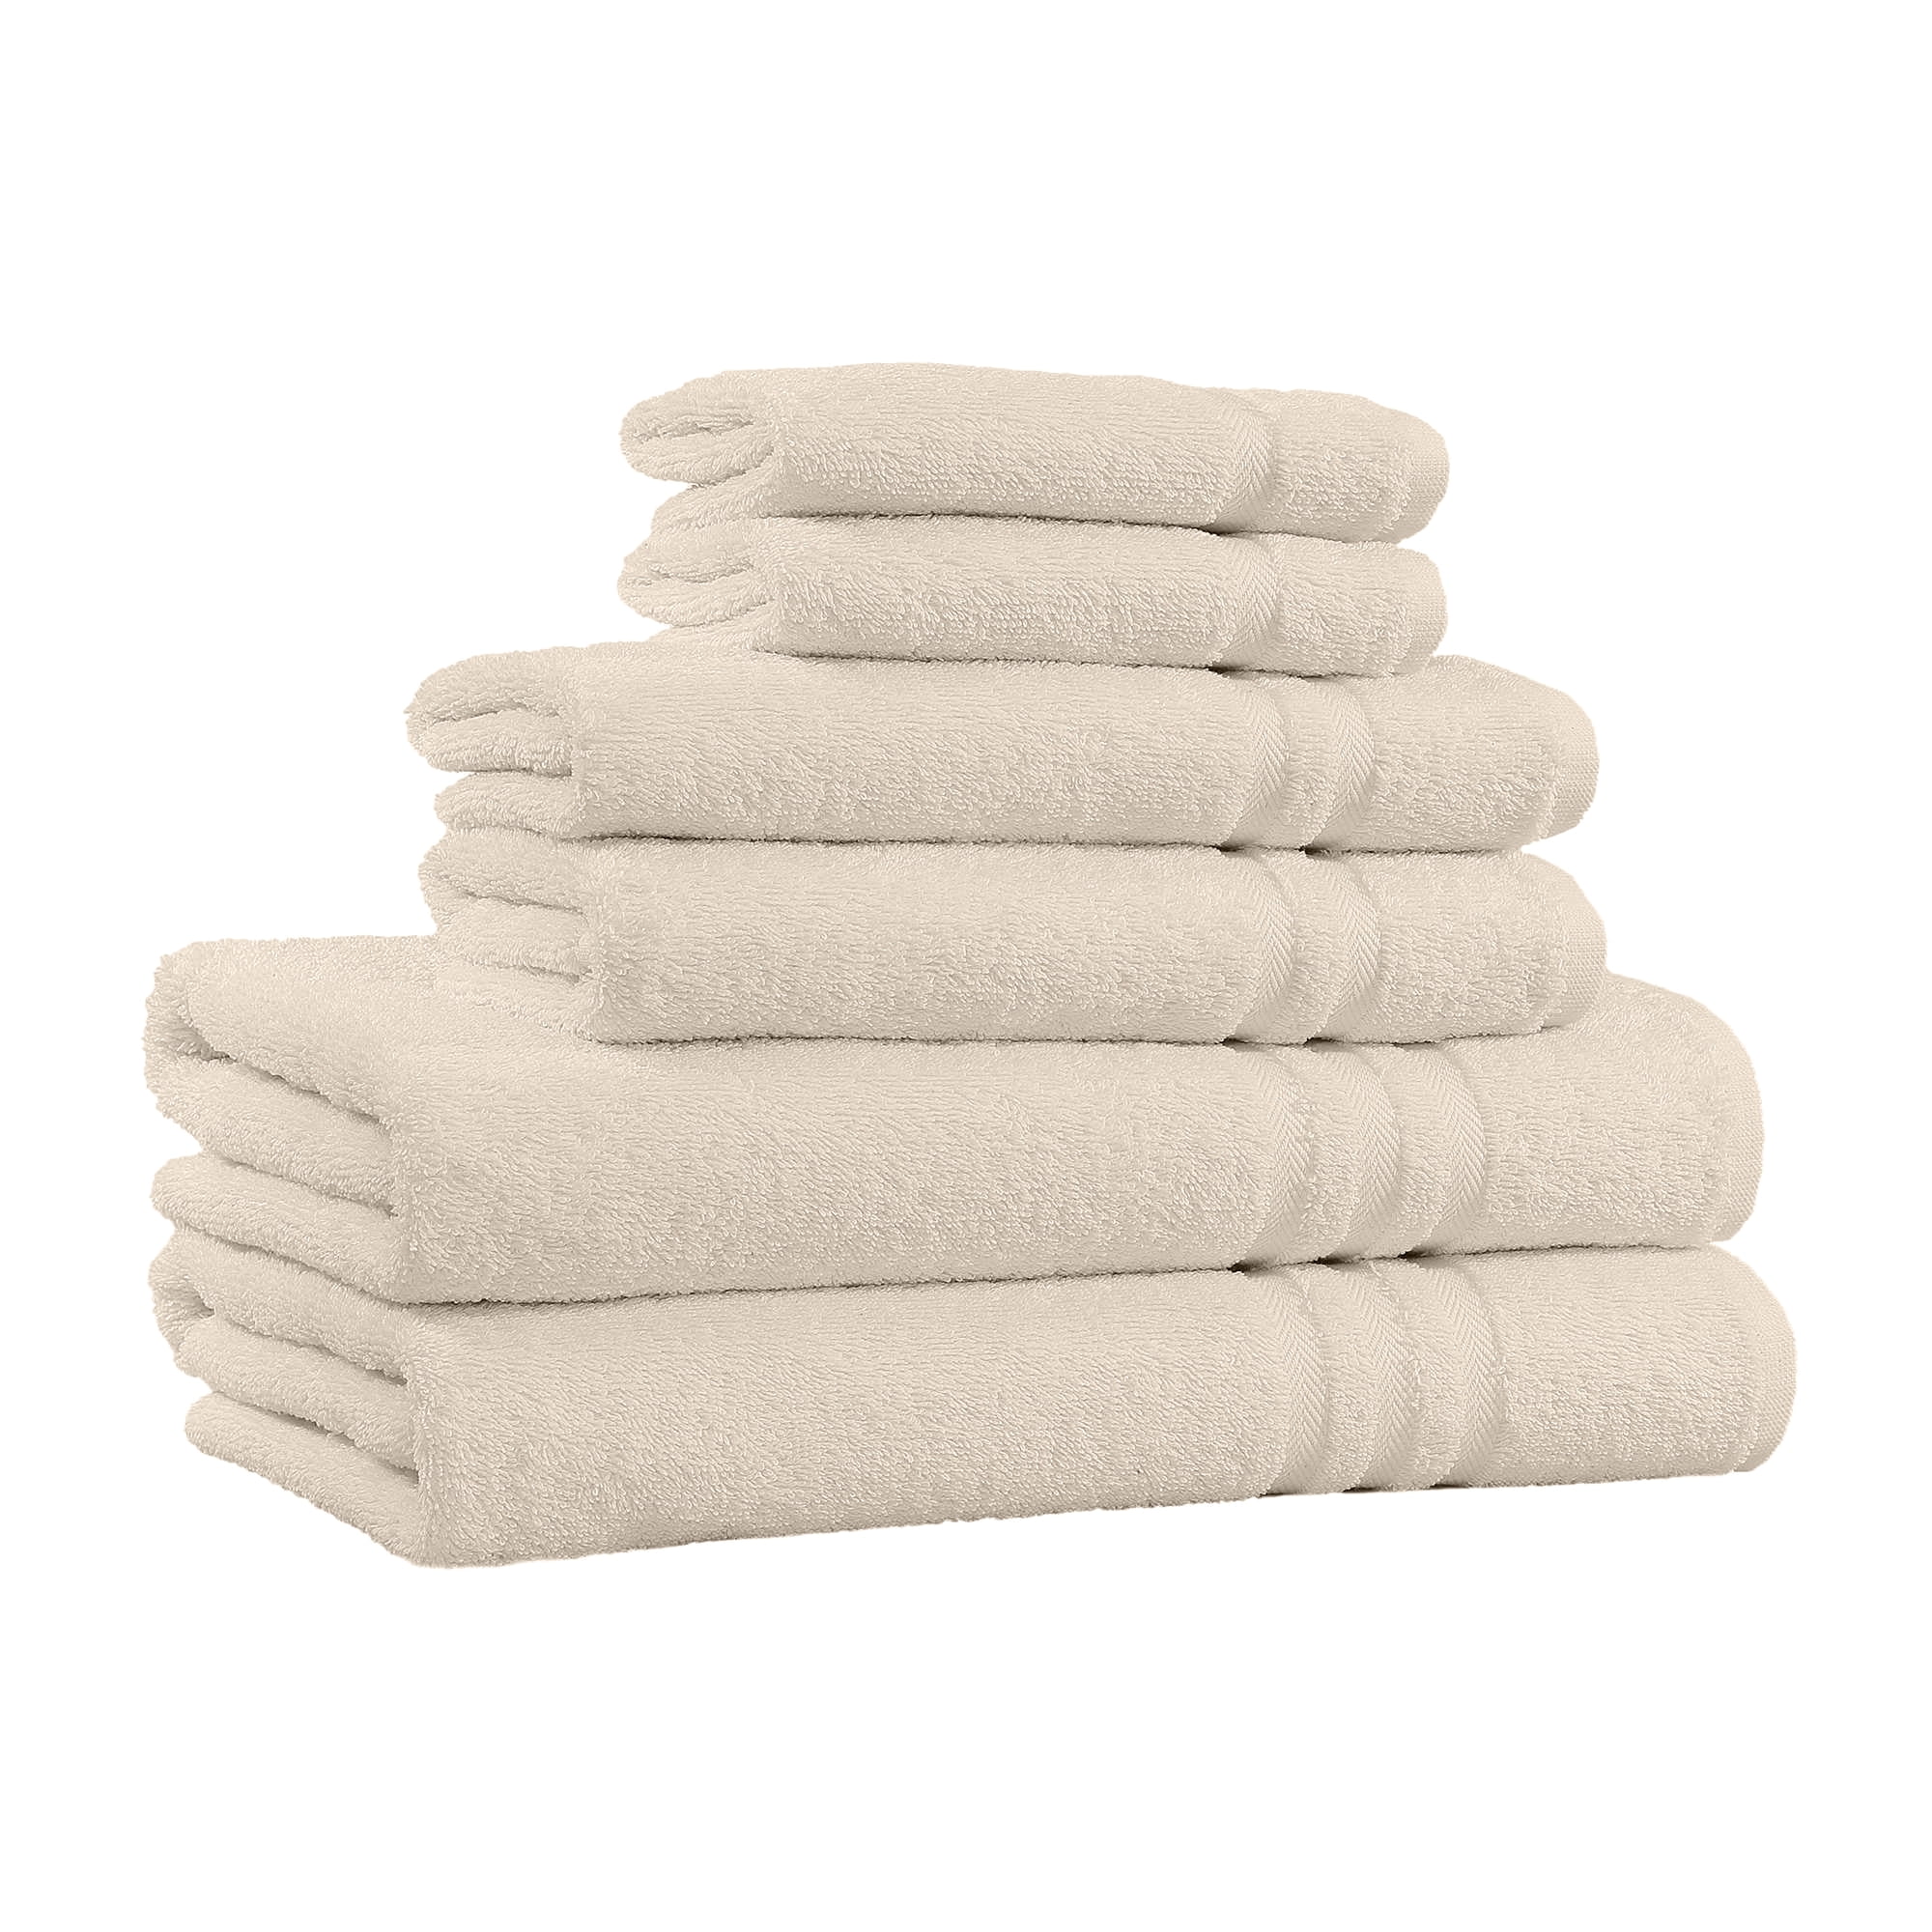 Bale Set 4,6,10 Pcs 500 GSM Home Collection Everyday Egyptian Cotton Towels 